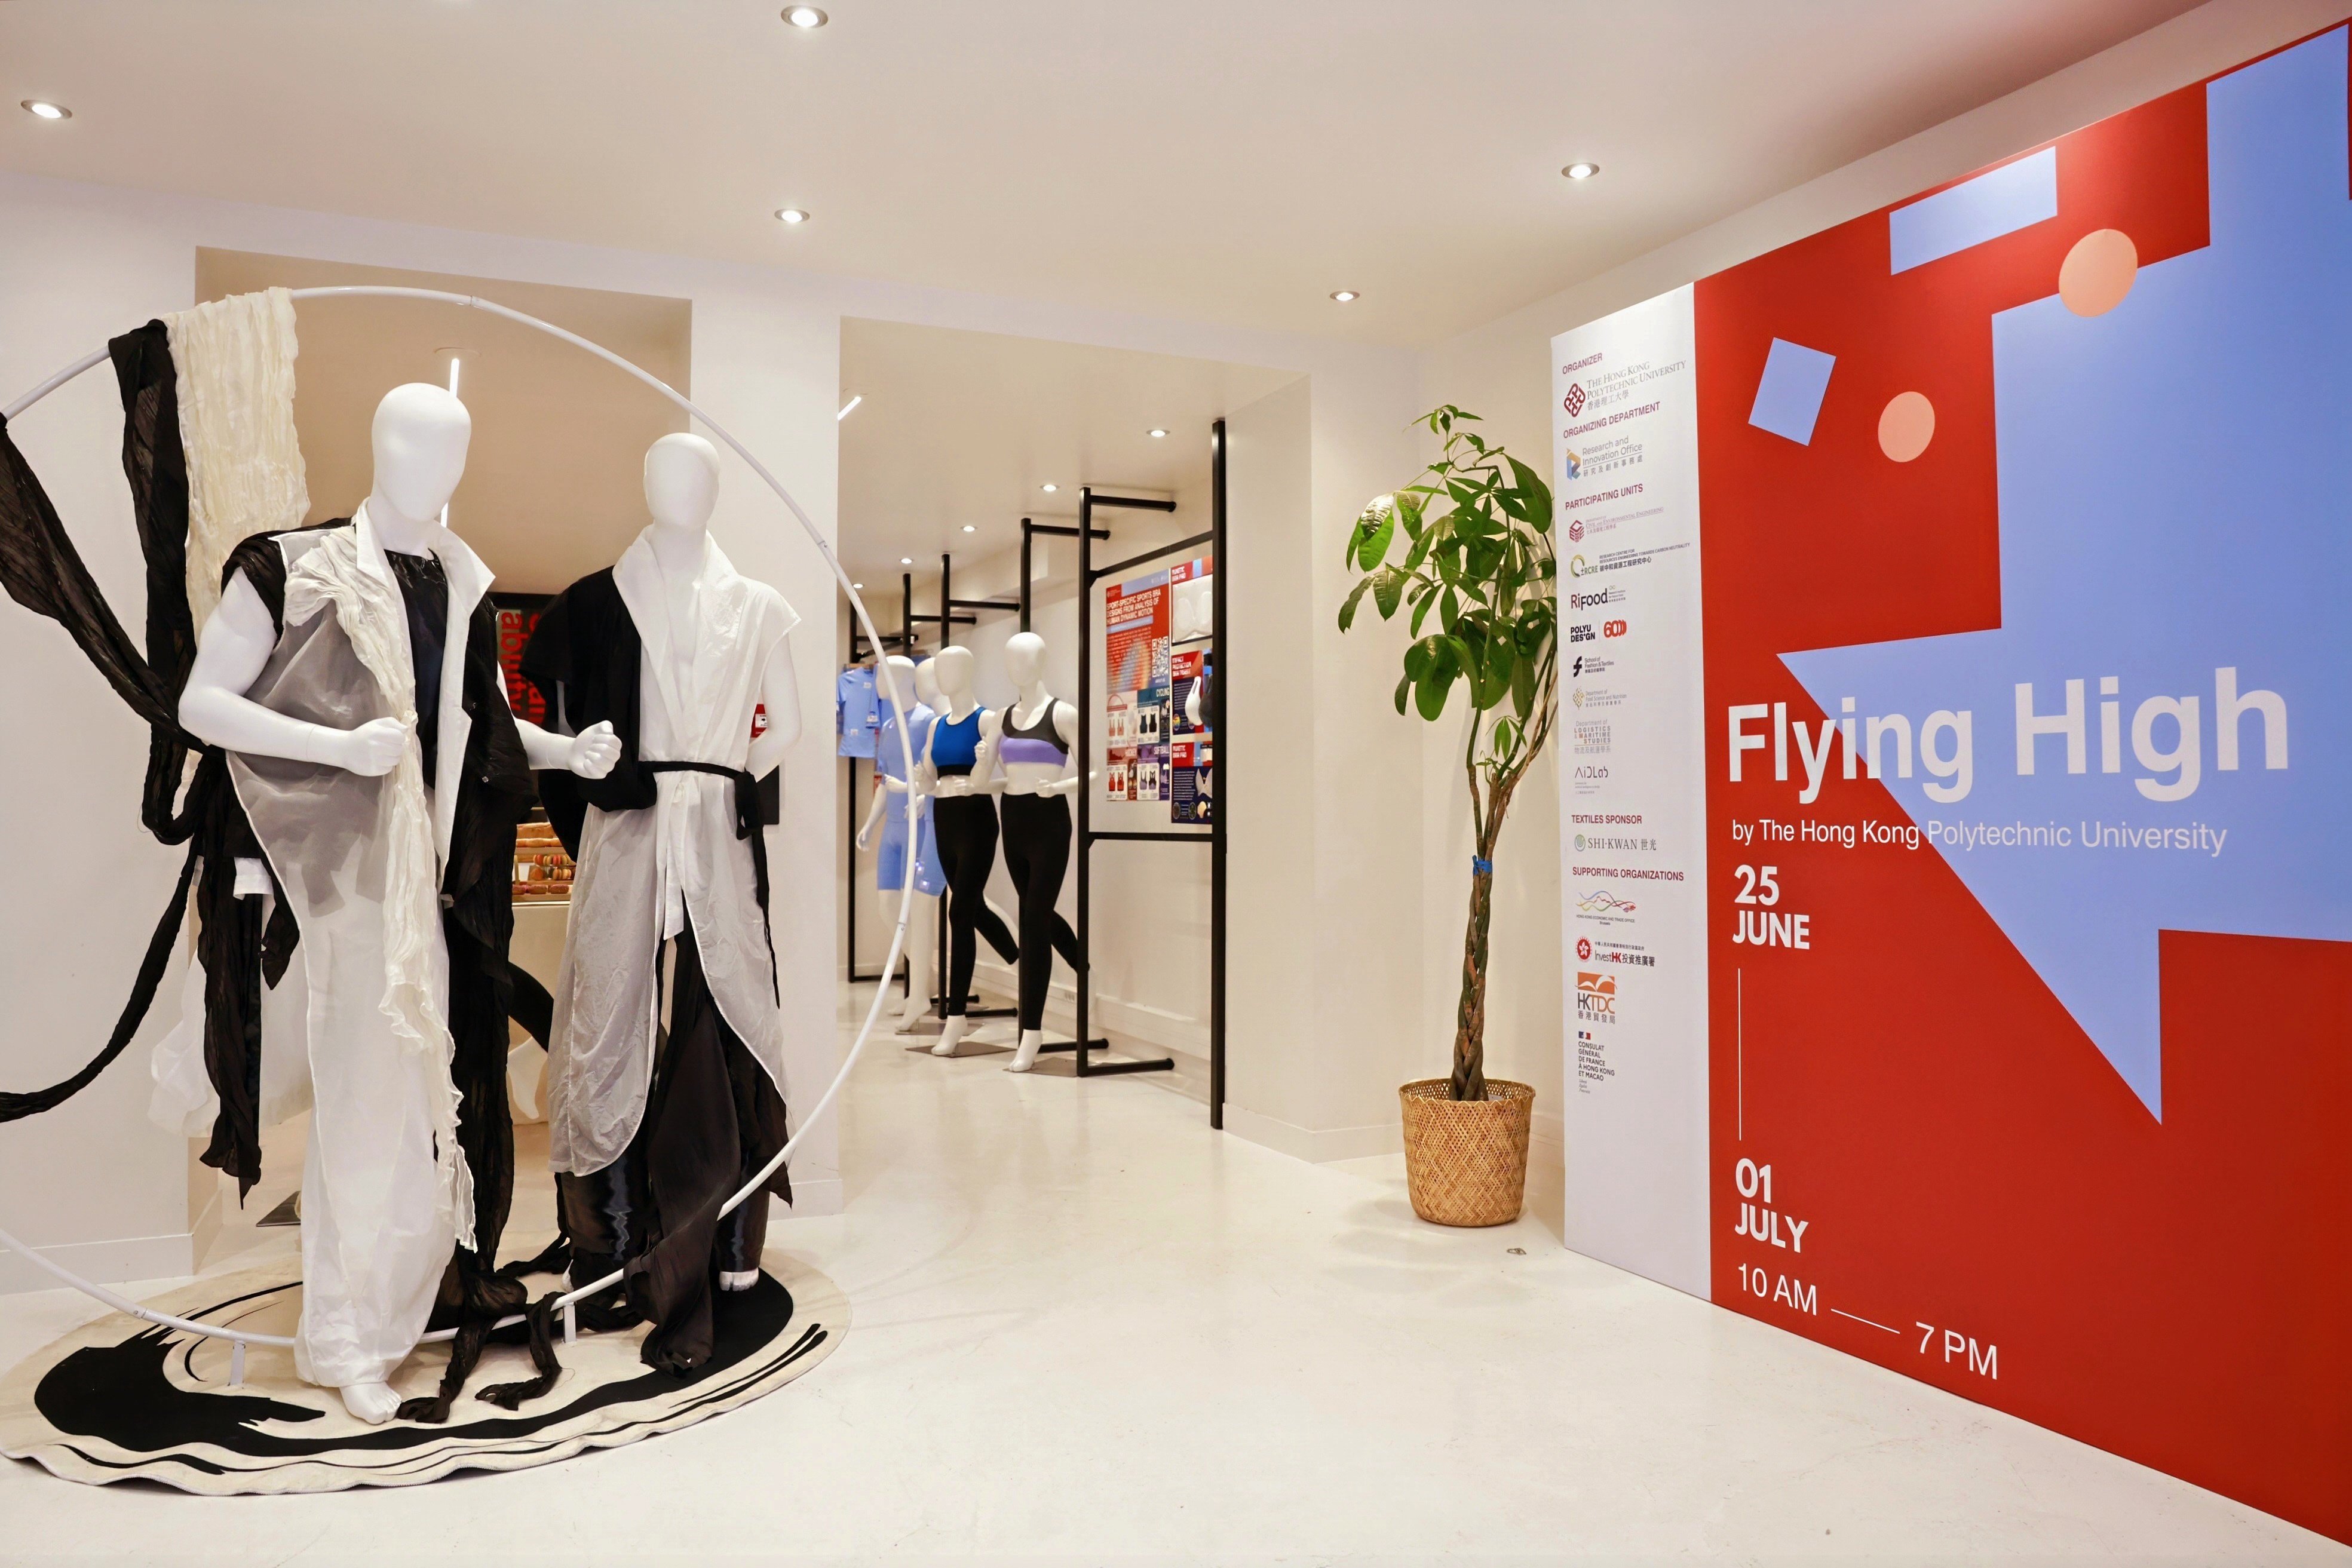 PolyU is hosting its inaugural “Flying High” exhibition in Paris, France, from now until 1 July 2024, featuring a diverse array of PolyU’s research and innovations across disciplines from fashion to technology and sustainable materials.